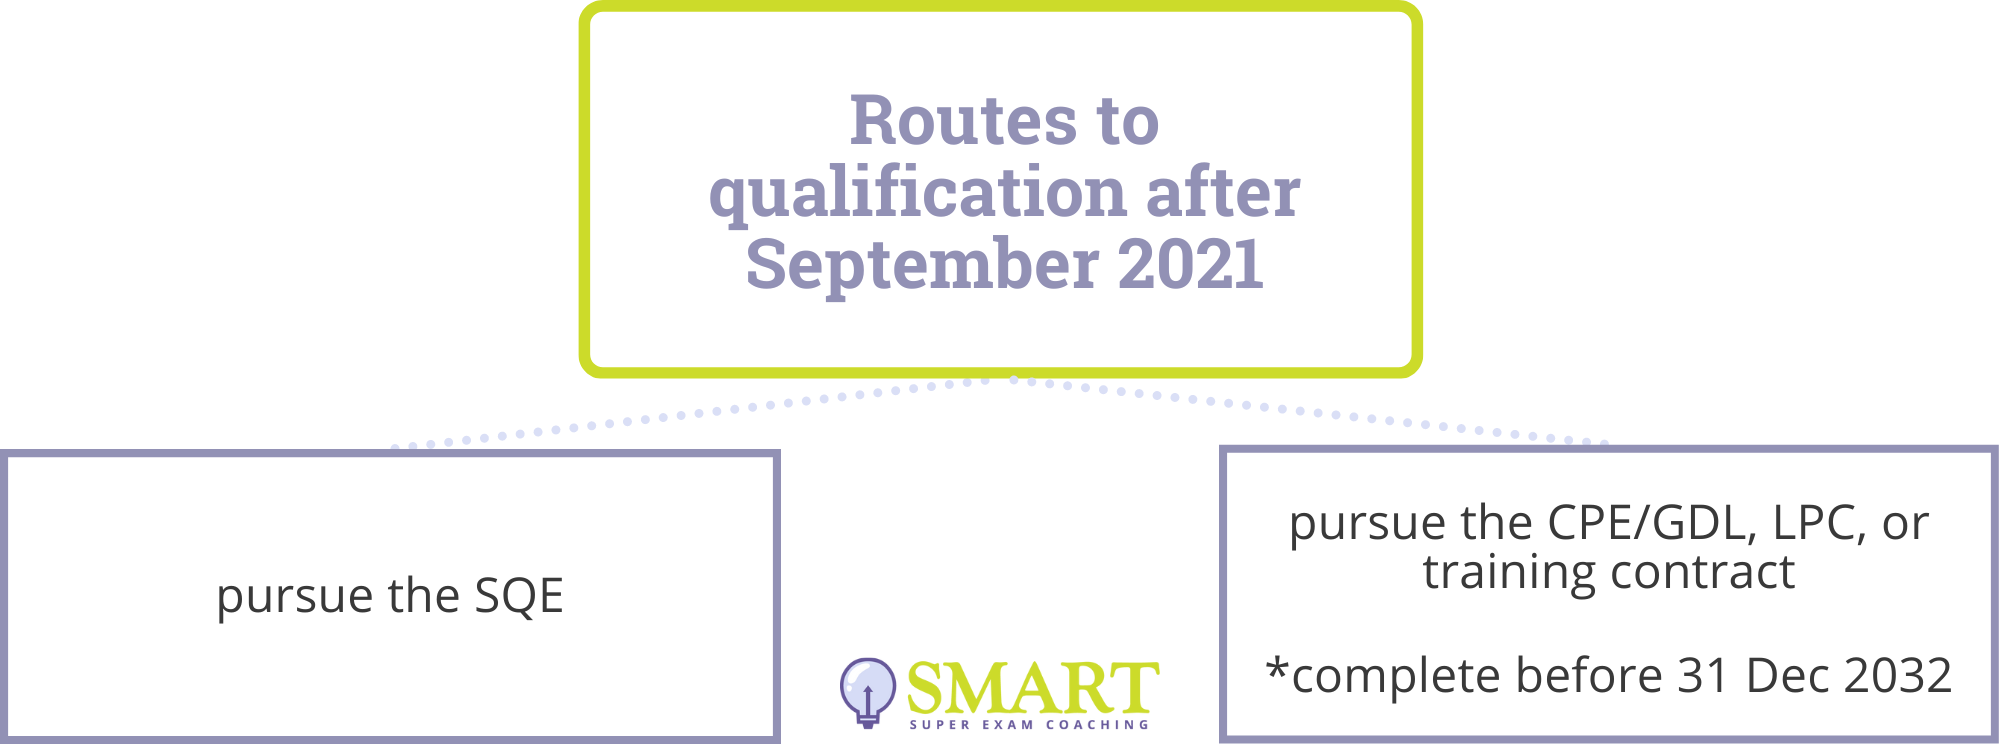 Solicitors' Routes to Qualification